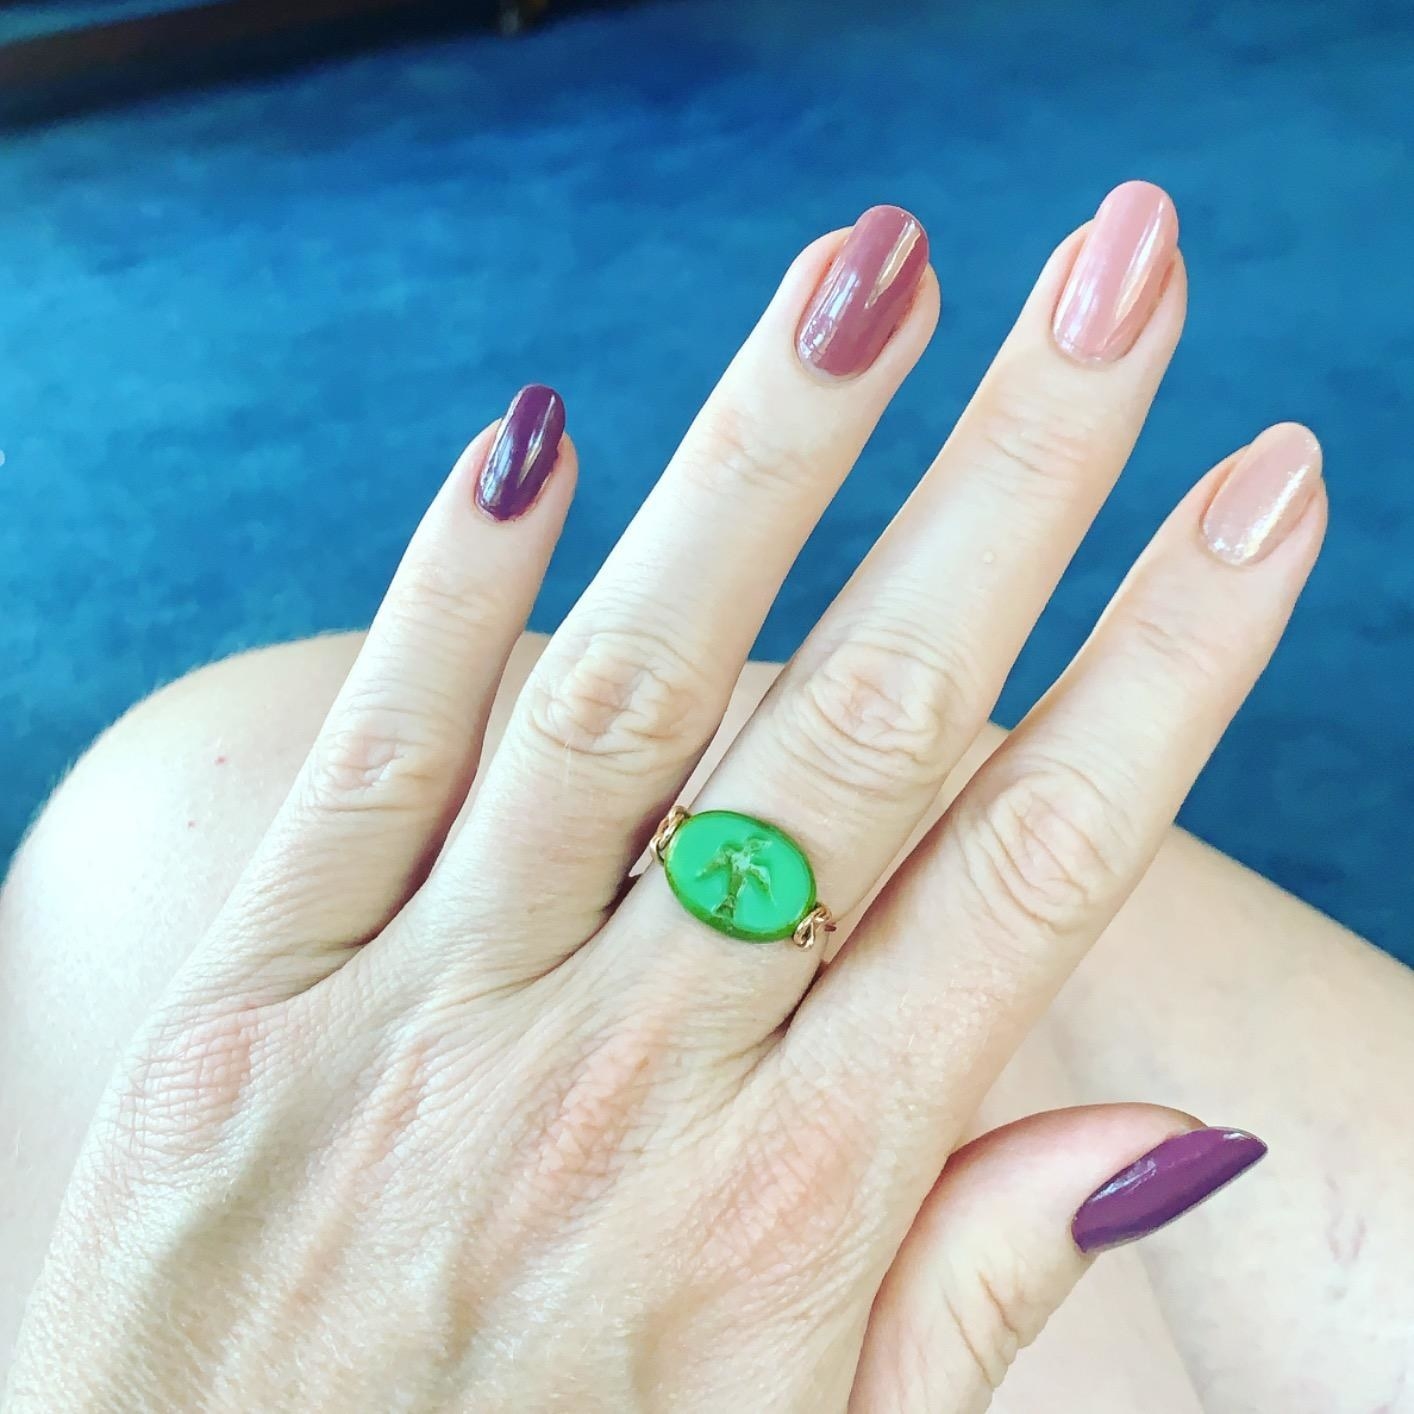 a reviewer photo of a hand wearing all four polishes, with a green ring on the middle finger